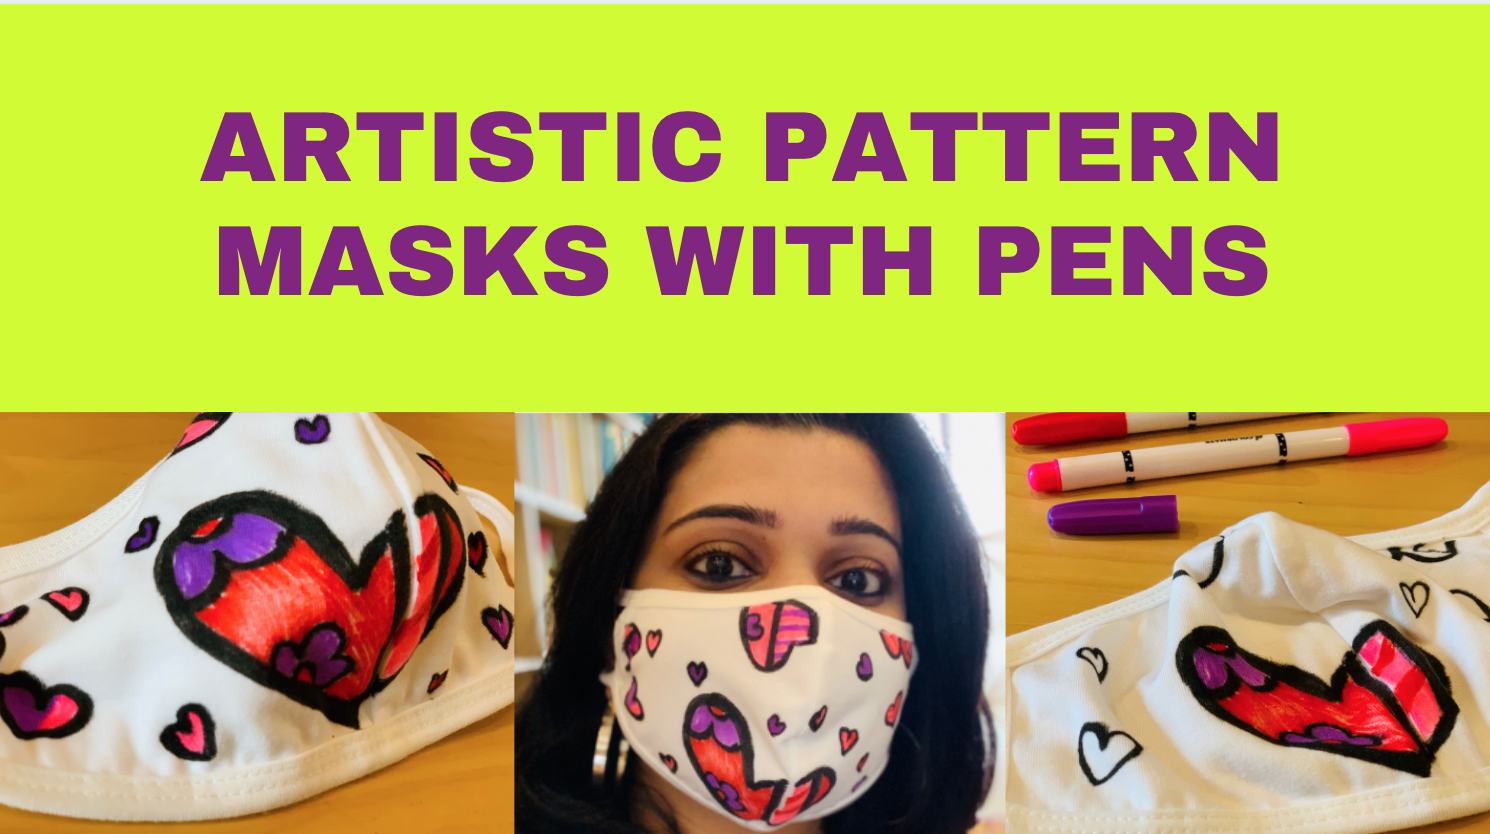 Artistic pattern masks with pens